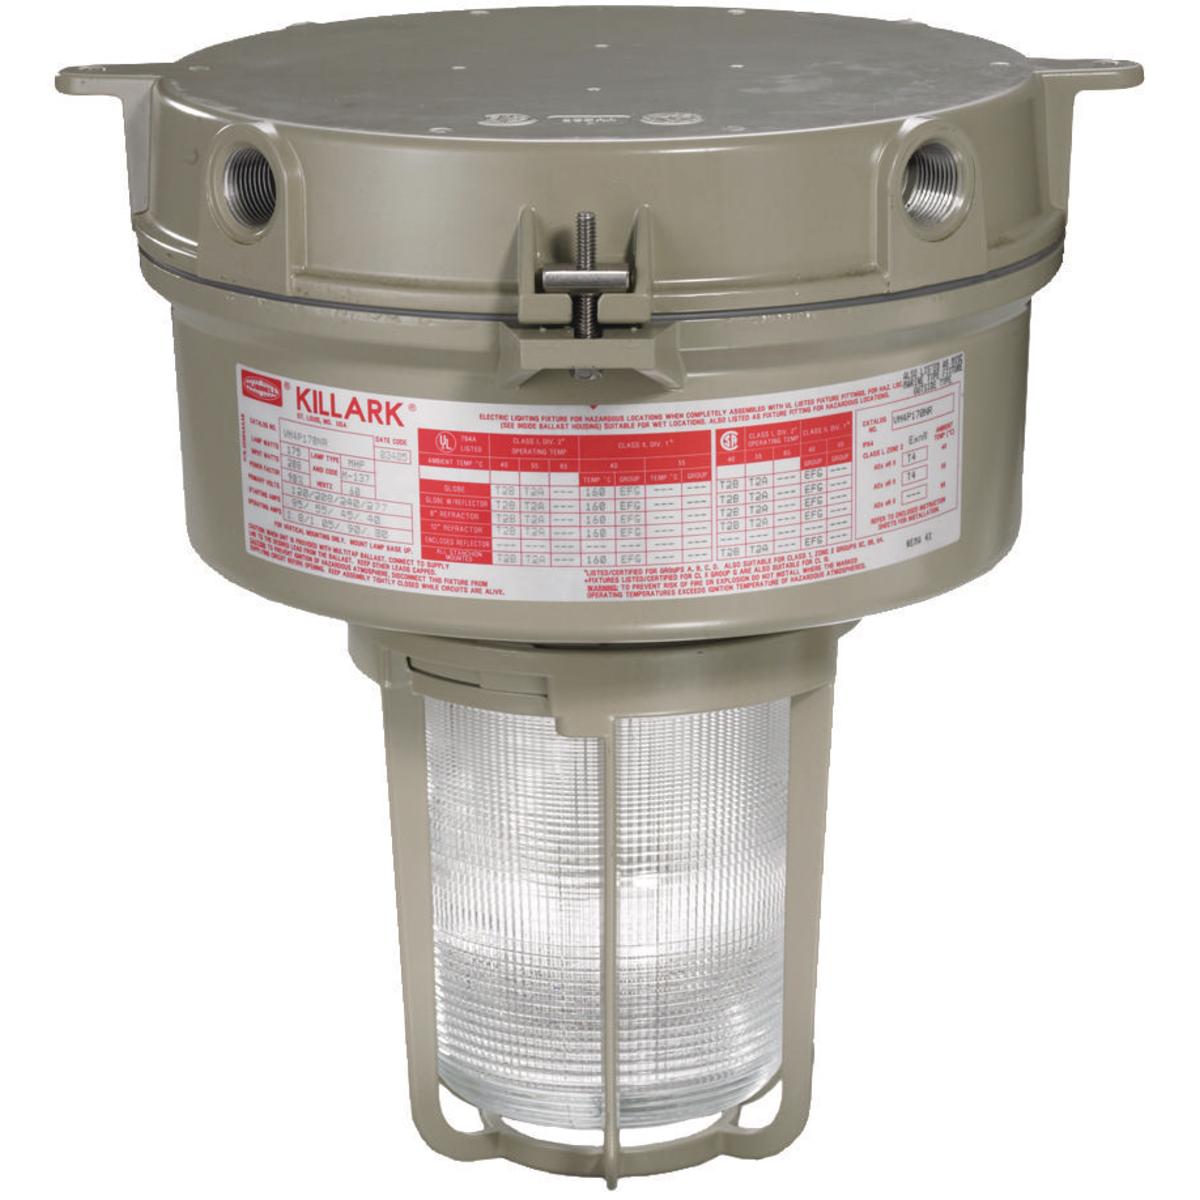 Hubbell VE3Q5226E30X2GLG VE3 52W Normal/26W Emergency,120-277V, 3/4" Ceiling Mount,Globe with Guard  ; Quad-Pin triple-tube long-life compact fluorescent lamps included ; World Voltage 120-277VAC 50-60 Hz ; LED charging indicator light visible through lens ; Prewired terminal blo